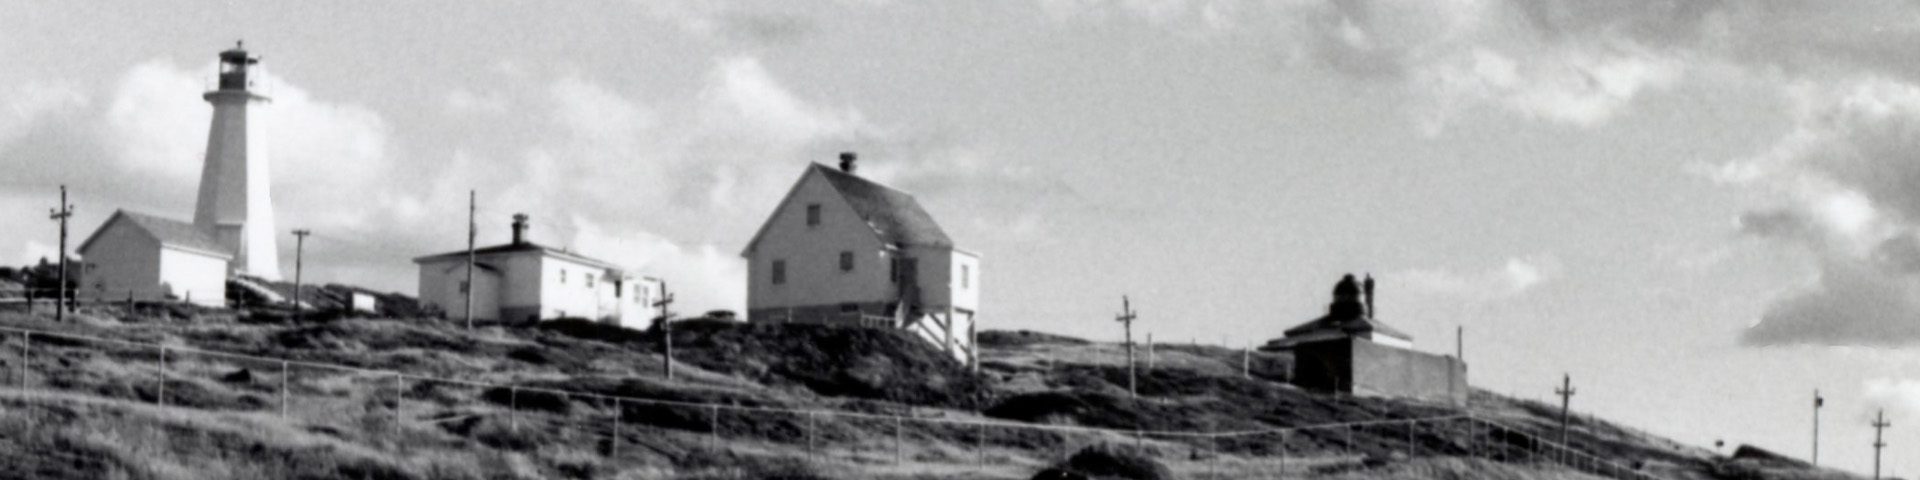 Cape Spear in black and white